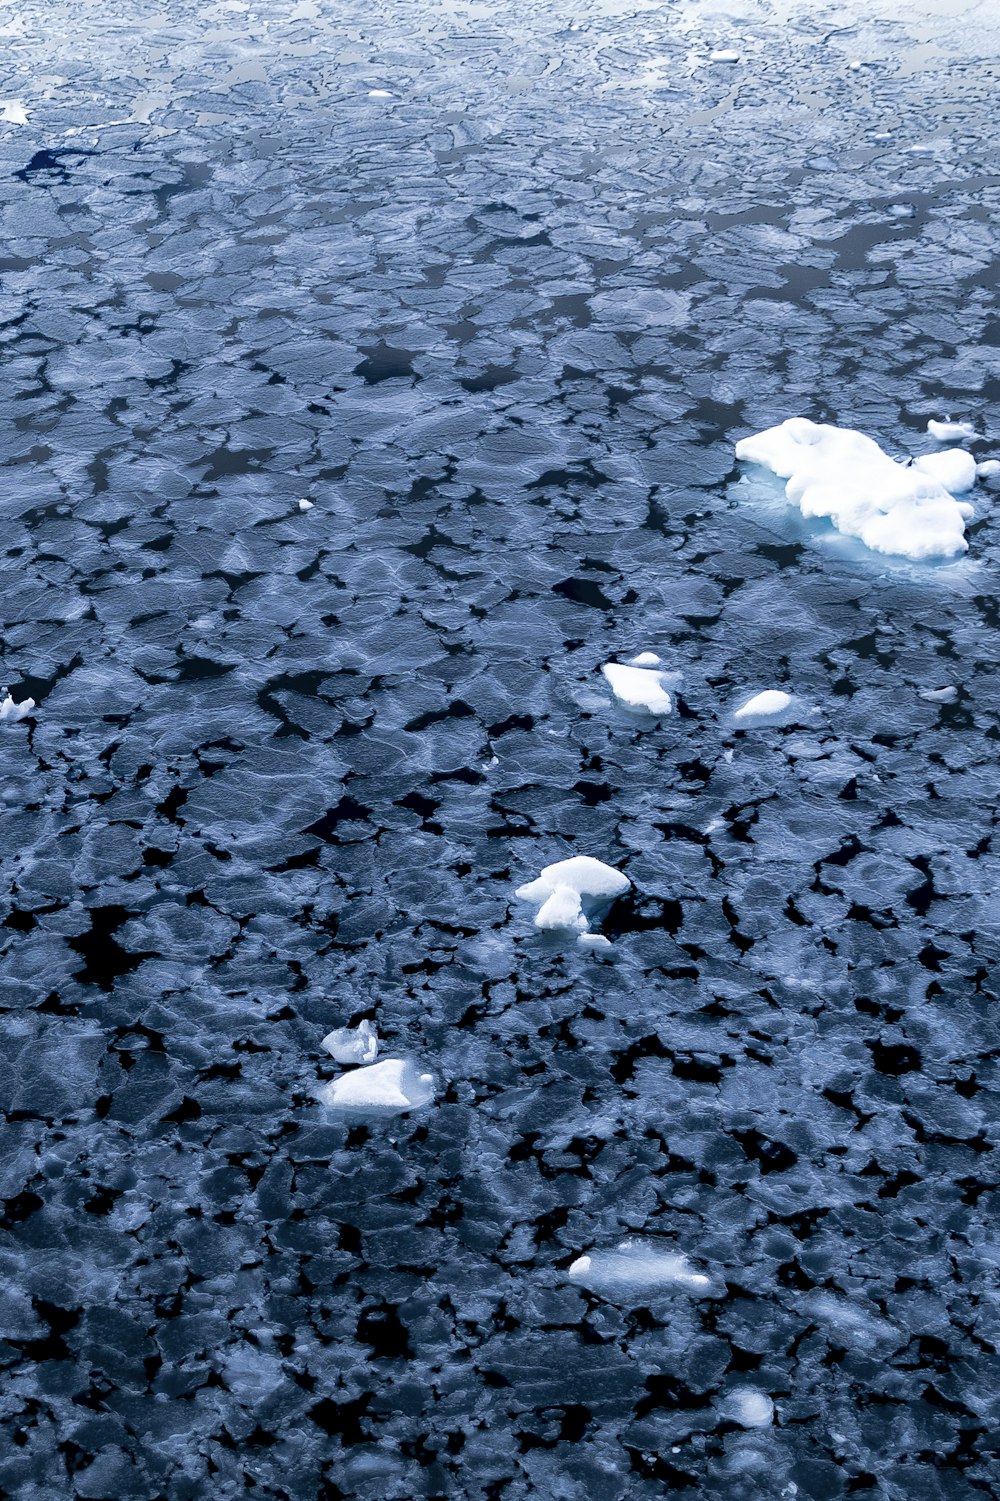 ice floes floating on a body of water